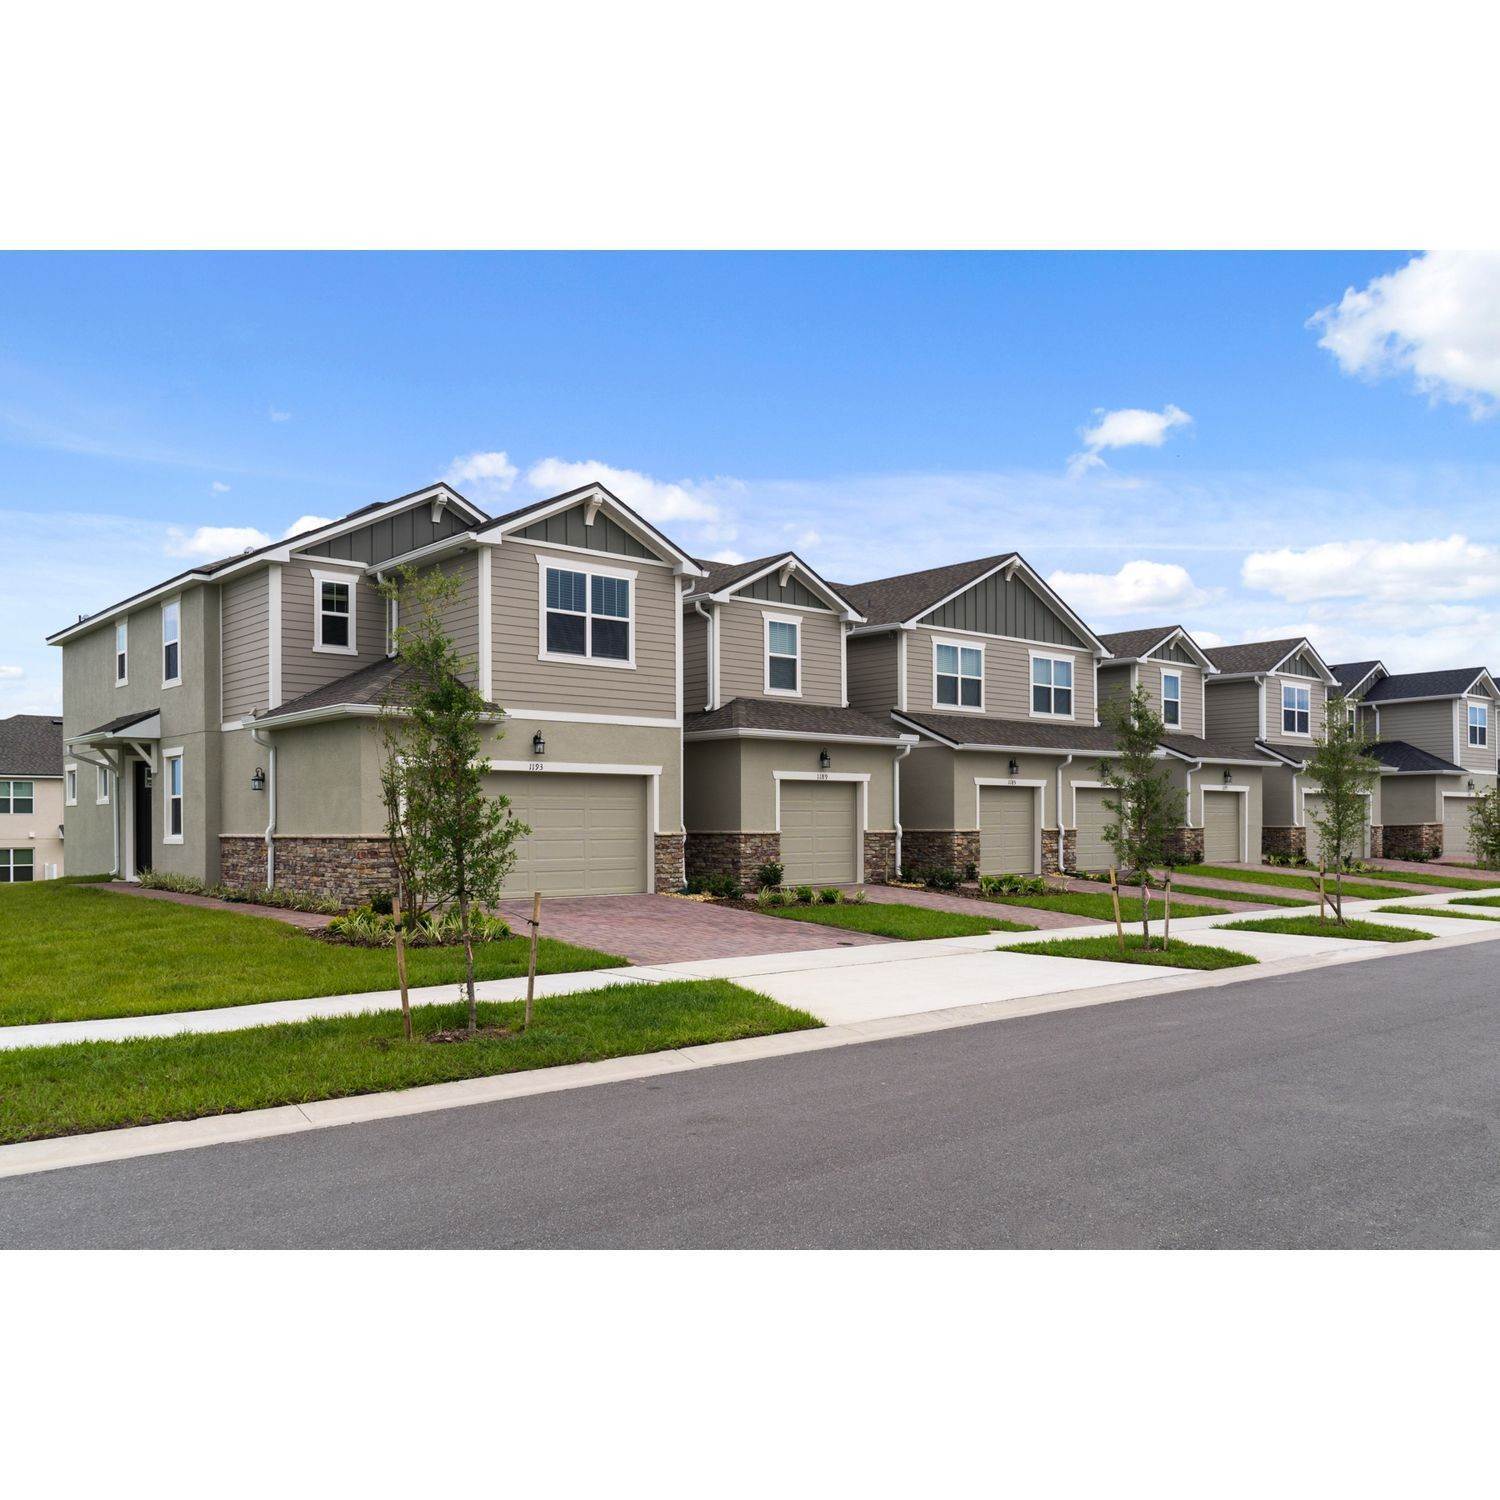 11. Soleil建於 1114 Turquoise Waves Cove, Kissimmee, FL 34747